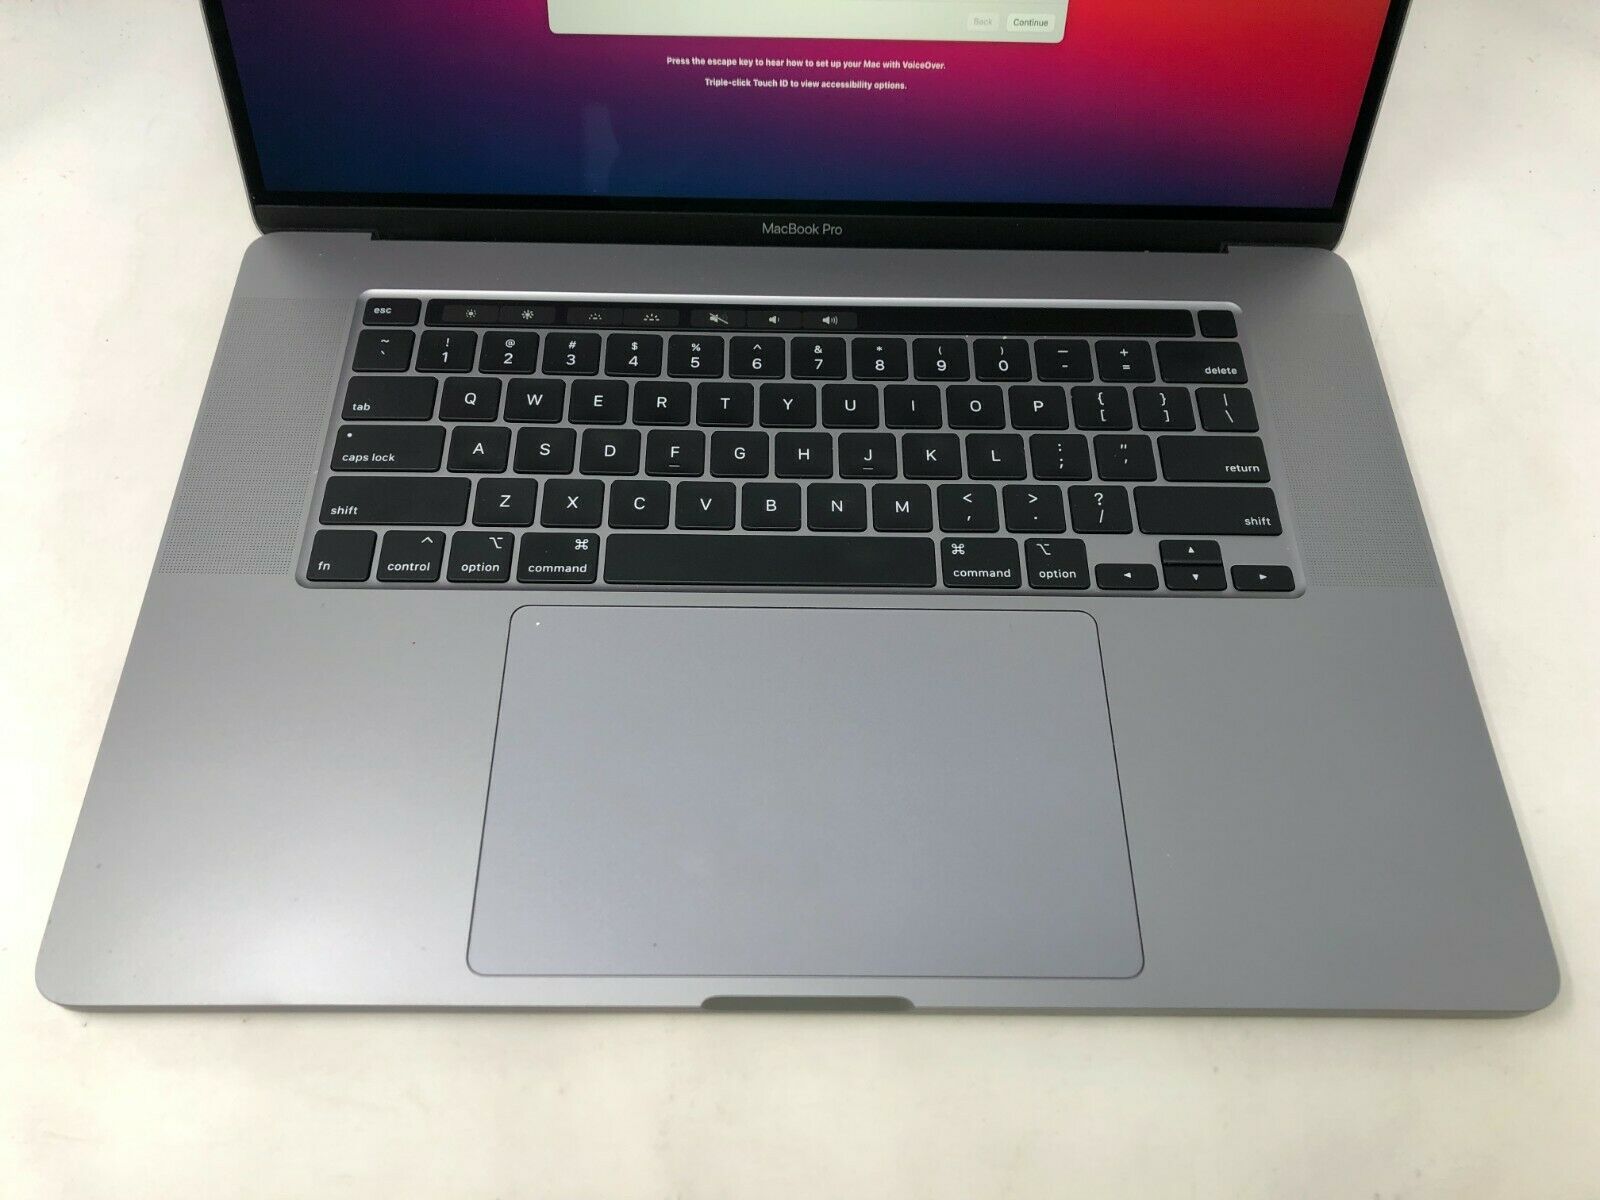 macbook pro 16 inch used for sale